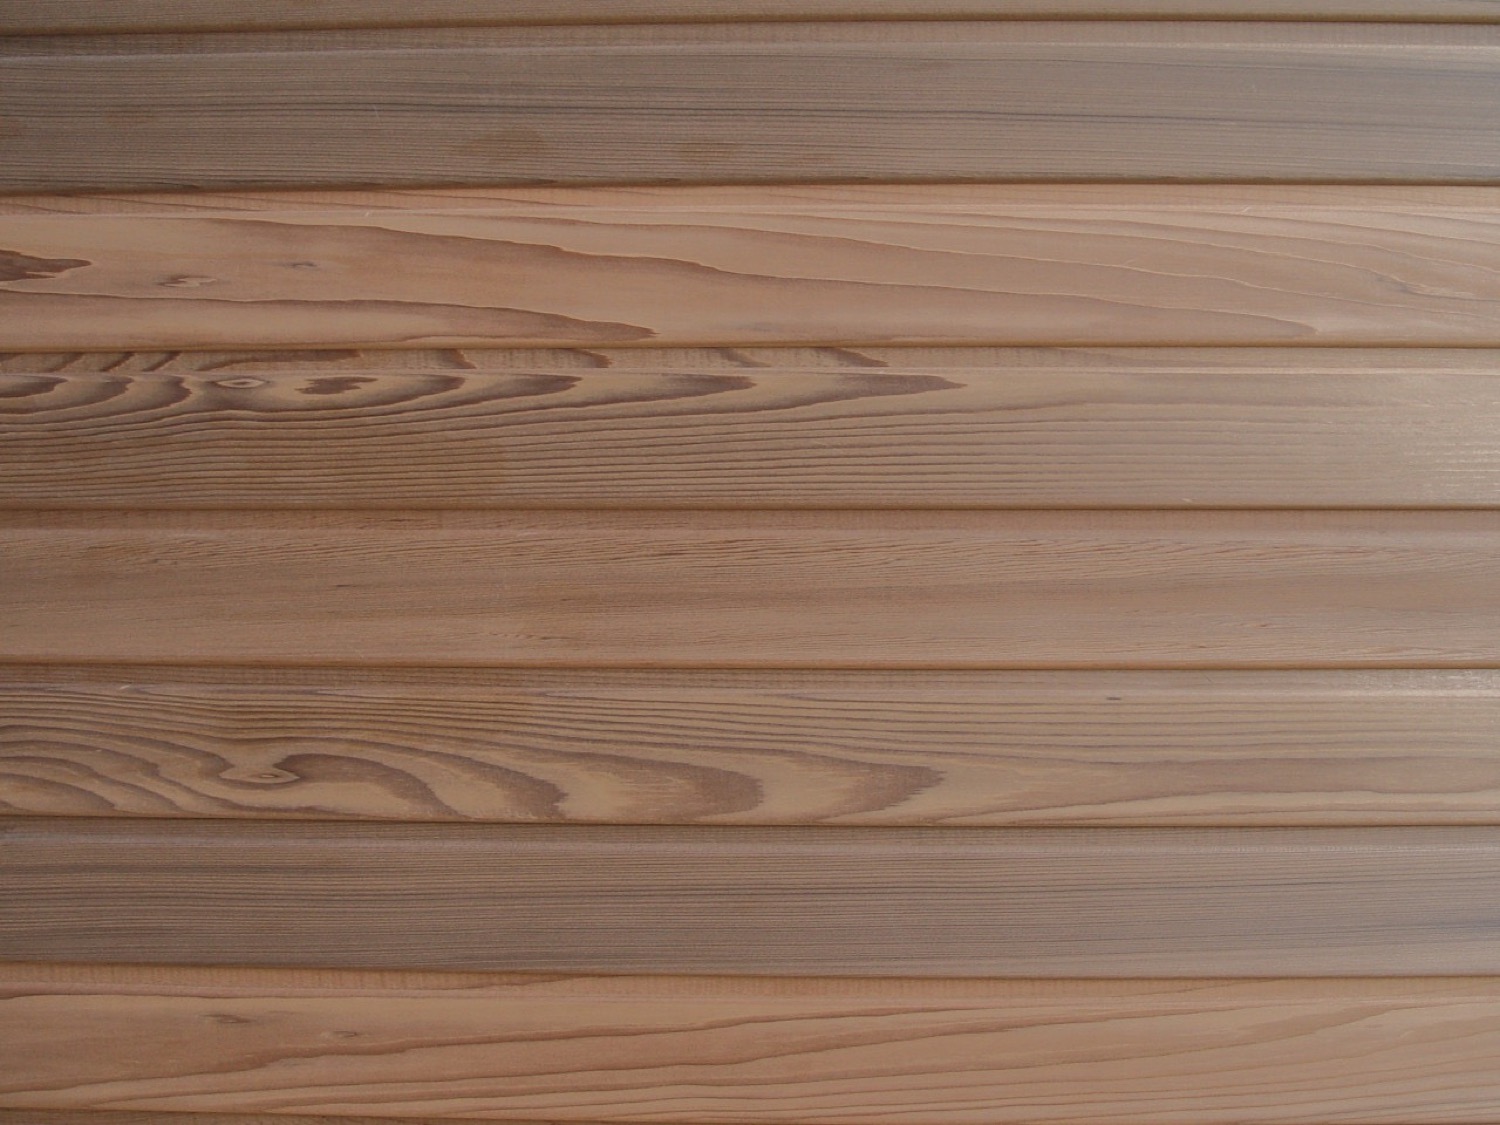 Red Cedar panelling. Looks really nice, but quite expensive.